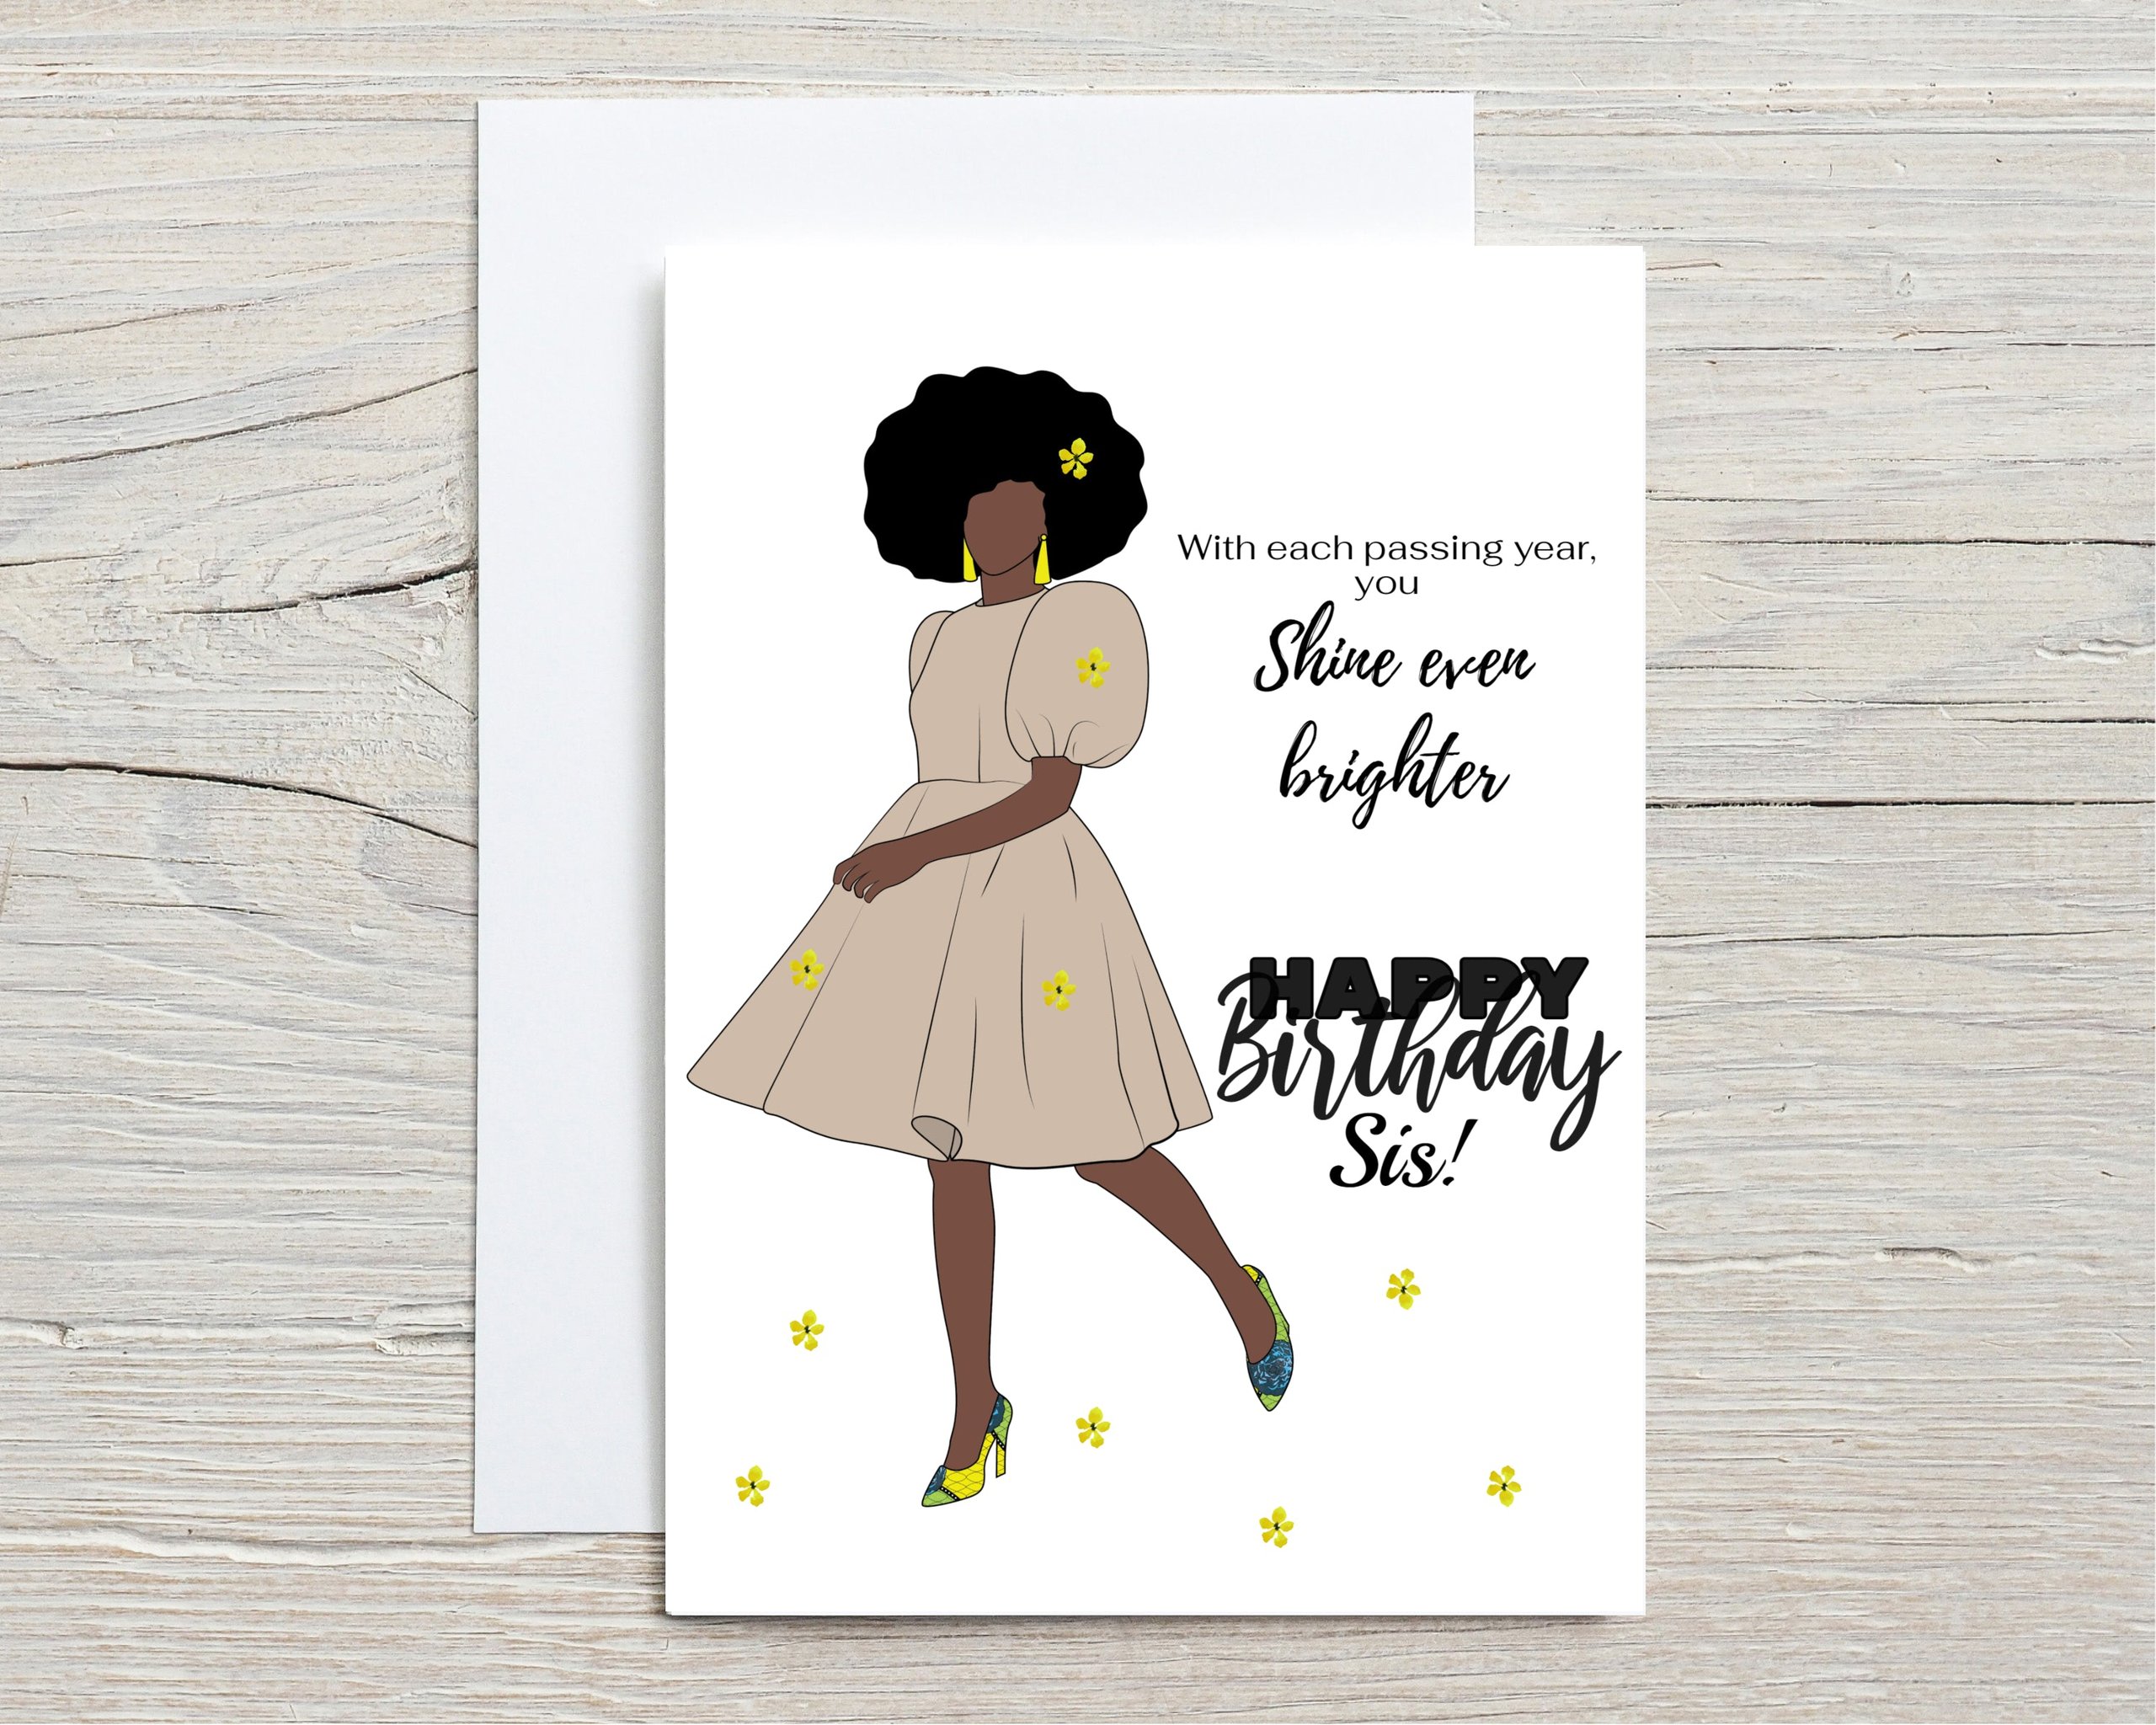 Black Afro Woman Birthday Card for Sister